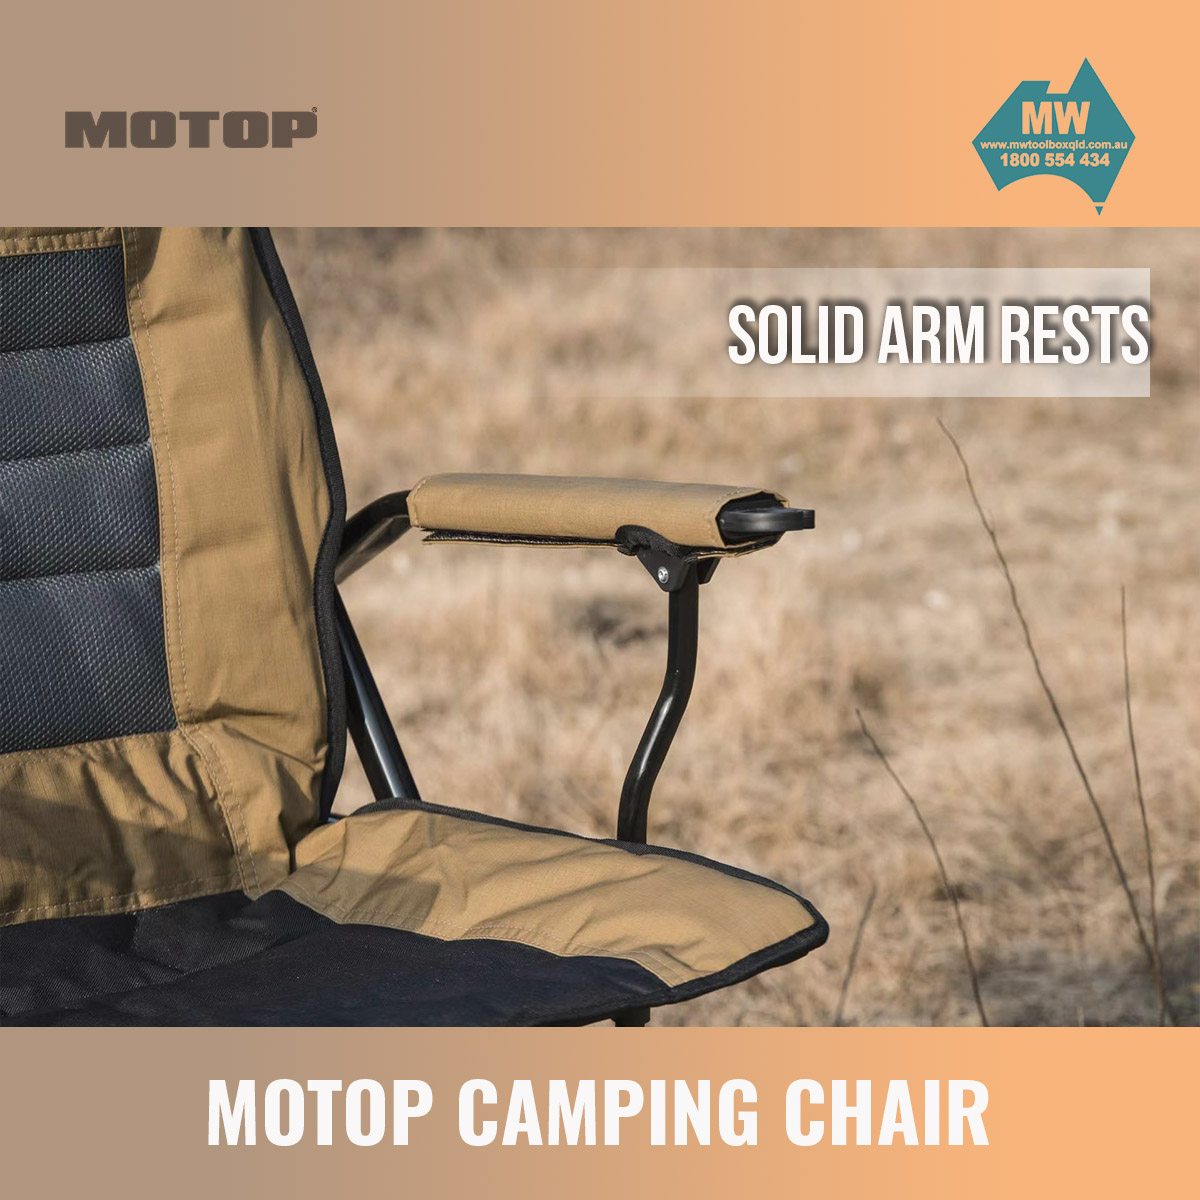 Motop Camping Chair-5